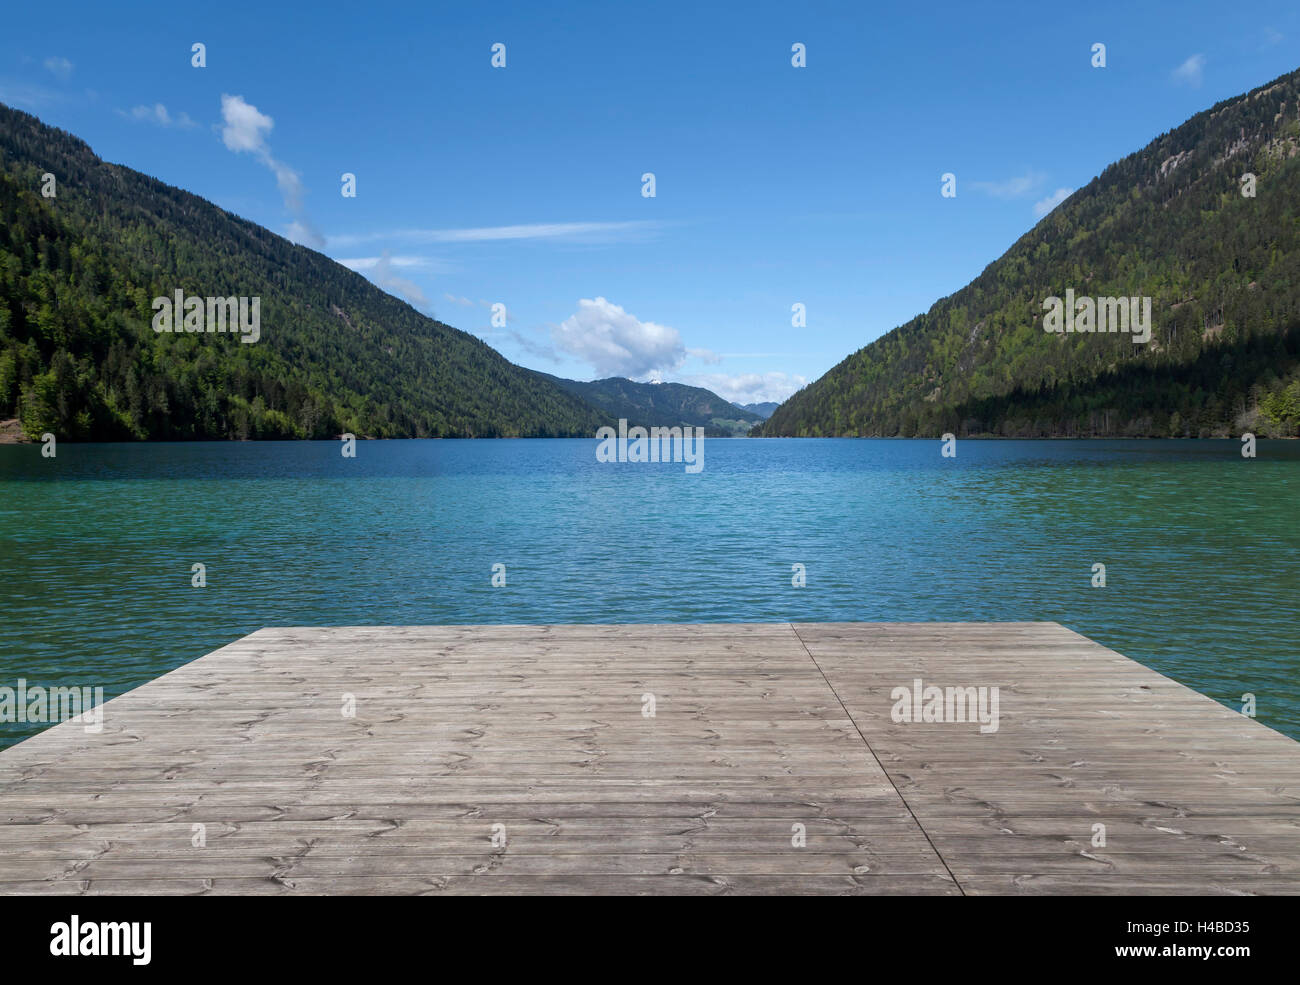 Bathing jetty at the Weissensee Stock Photo